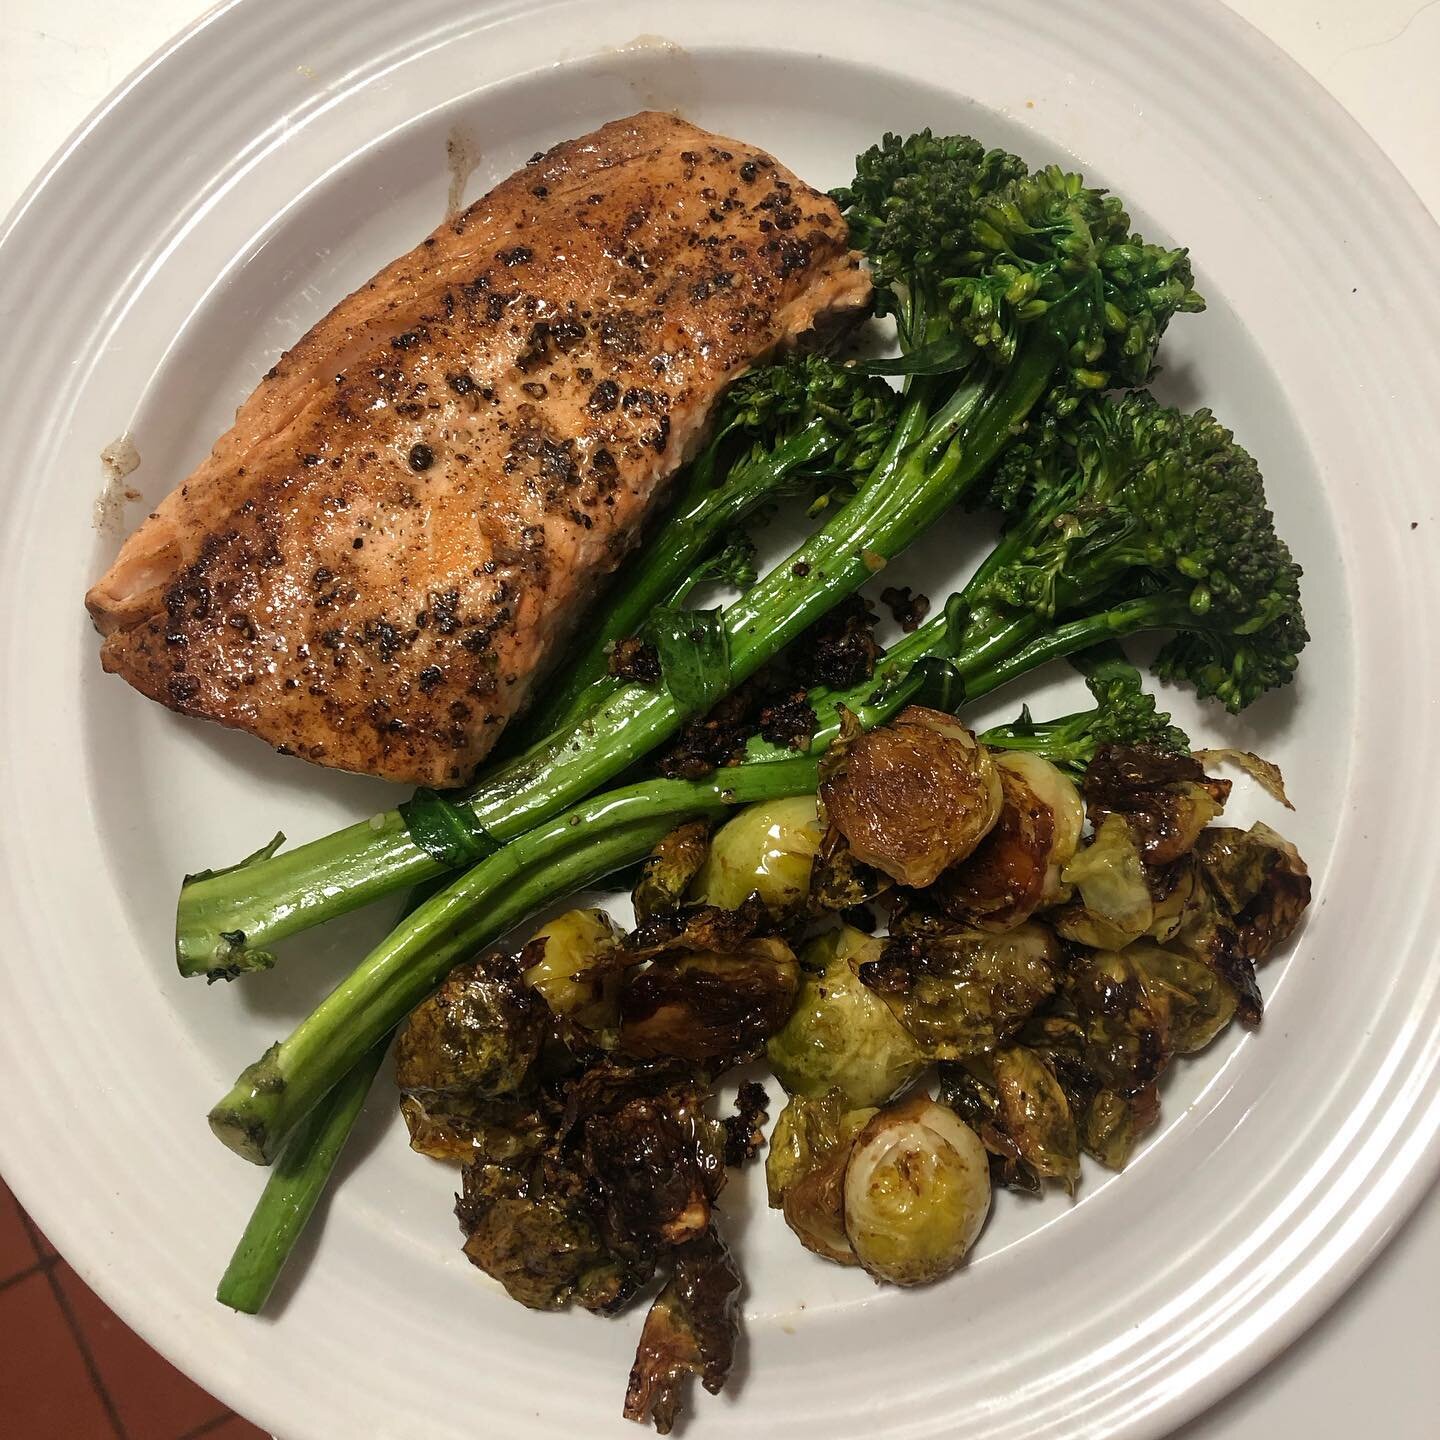 done made myself a proper ass dinner last night!!! salmon, broccolini &amp; balsamic maple brussels sprouts 🤤😋